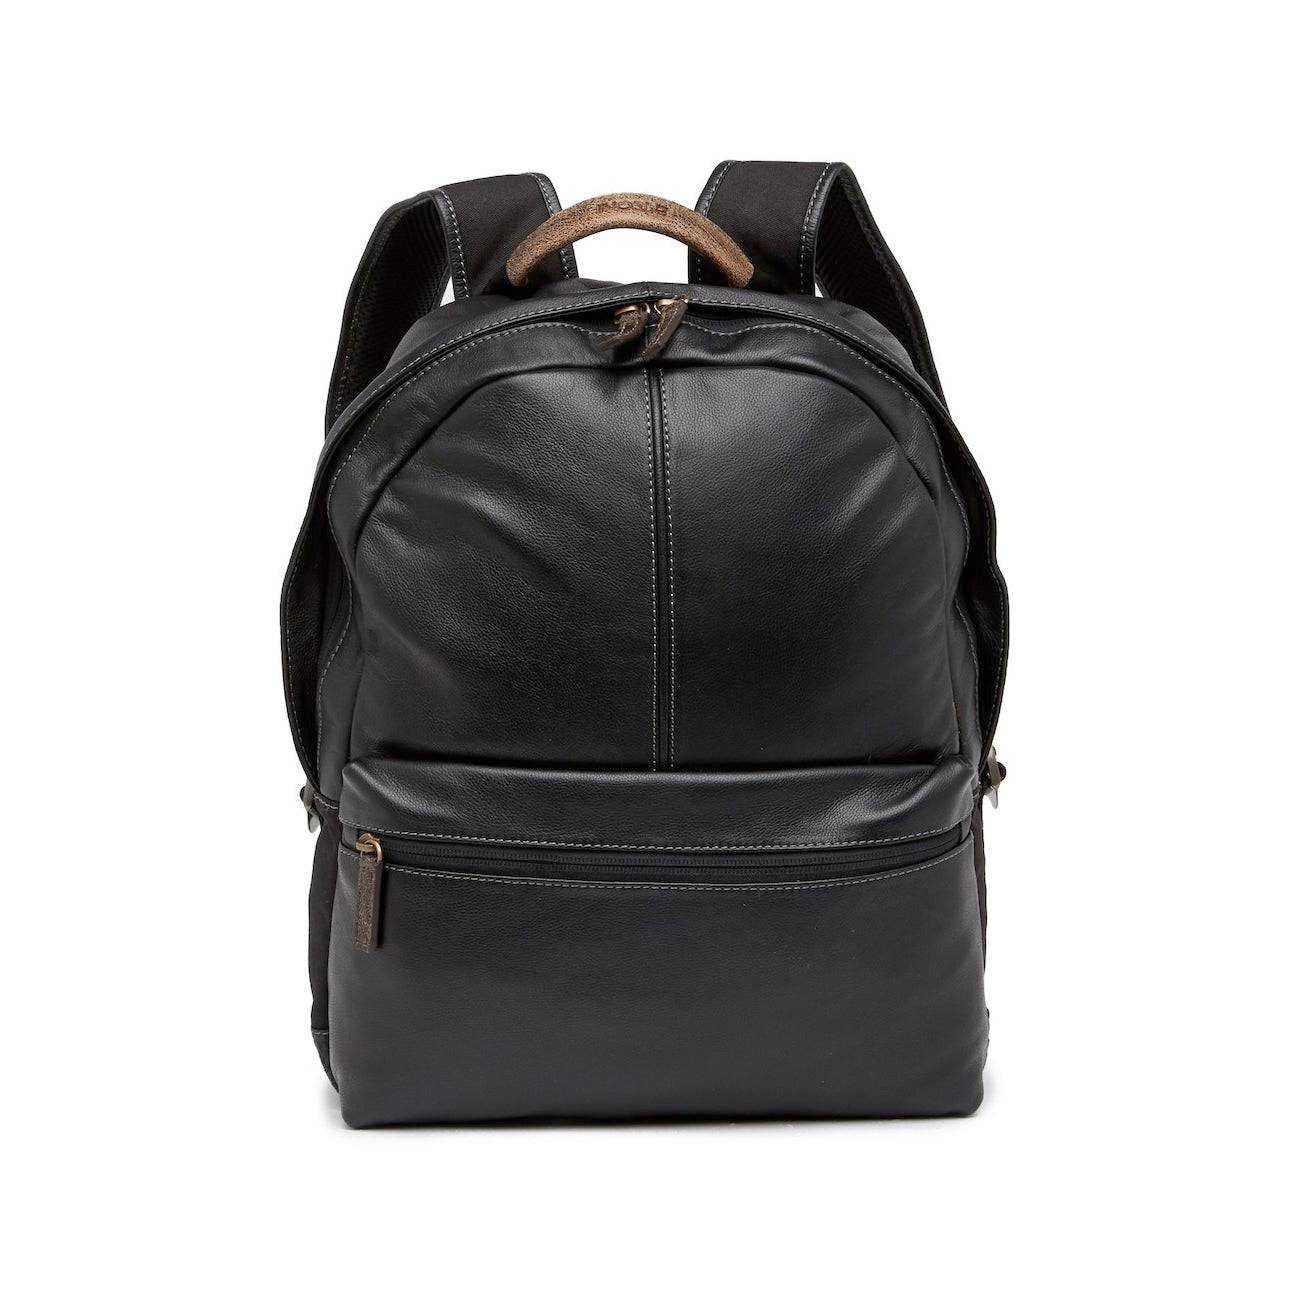 a black backpack on a white background